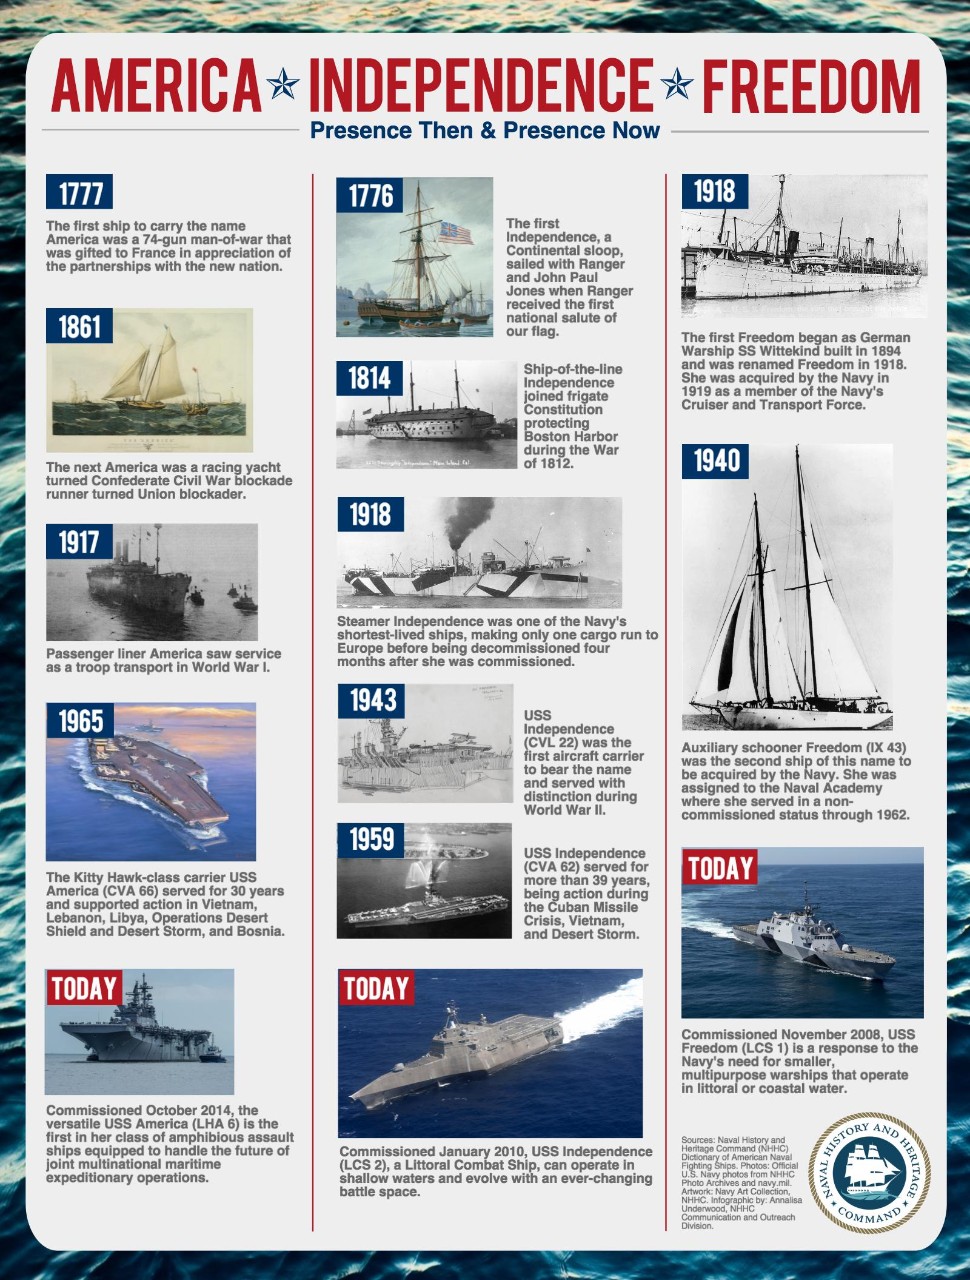 This infographic shares the history of U.S. Navy ships that have born the name America, Independence and Freedom